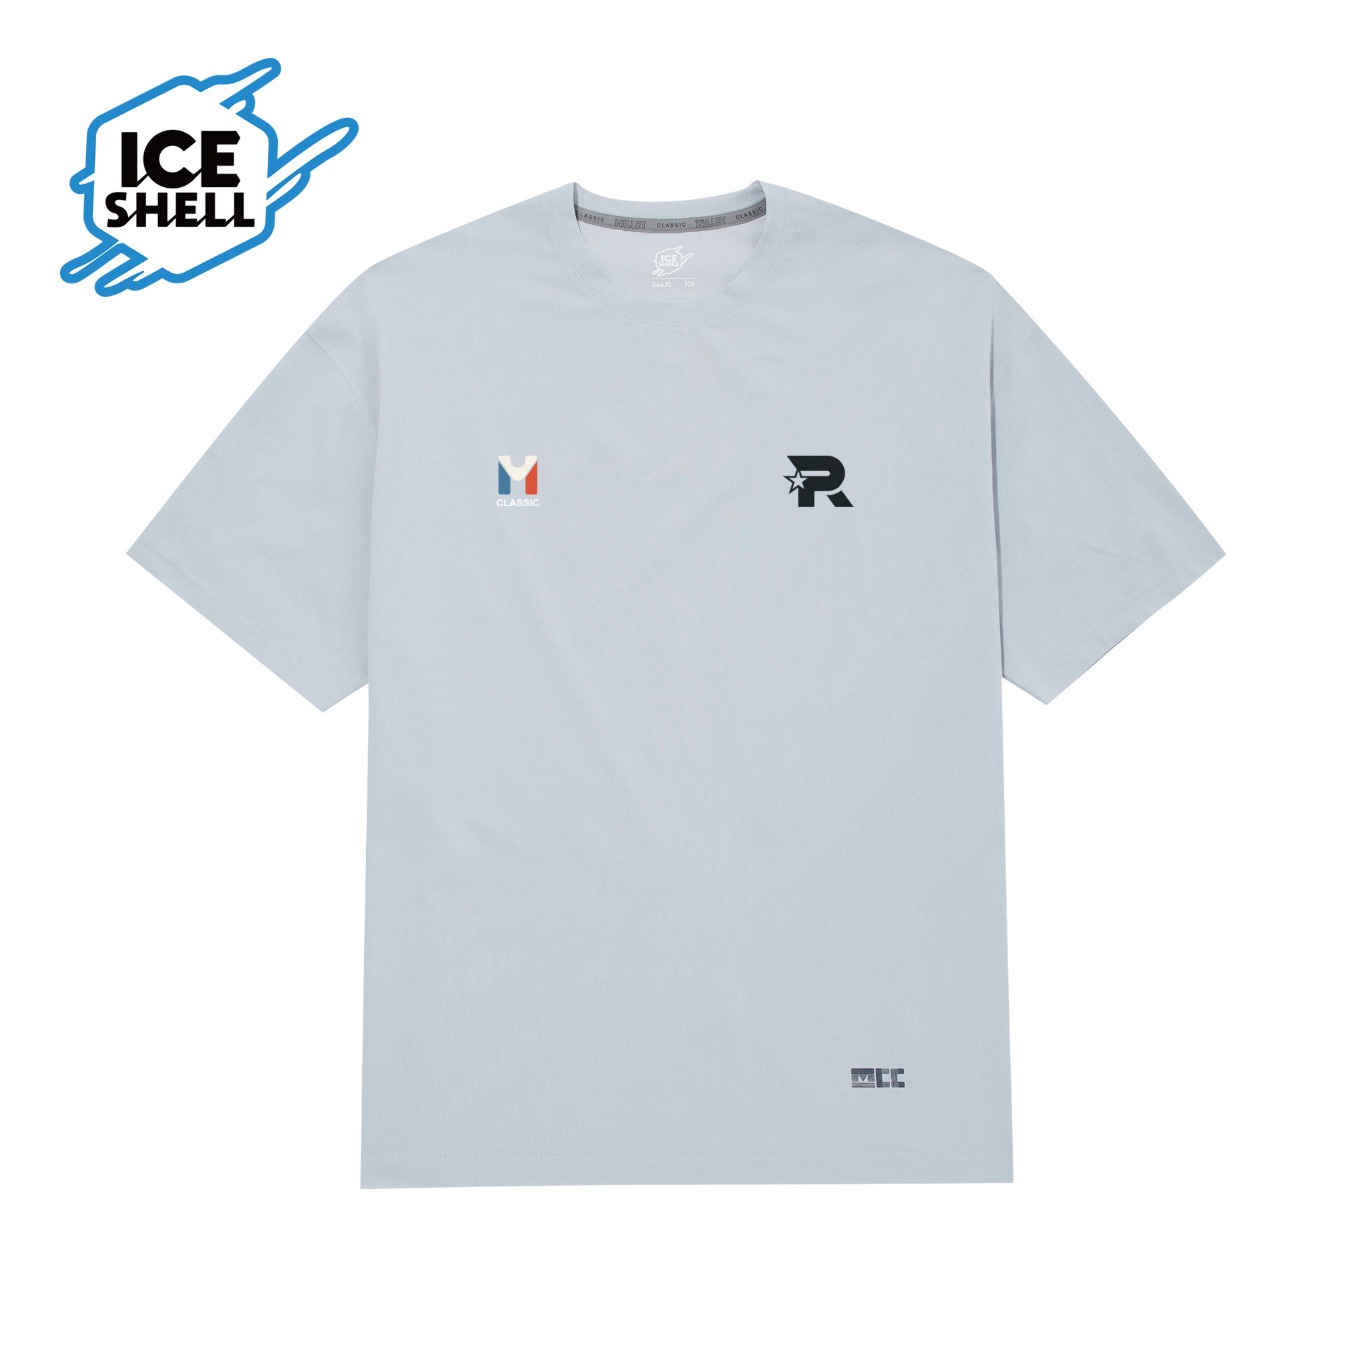 X KT ROLSTER ICE SHELL T-SHIRTS GREY